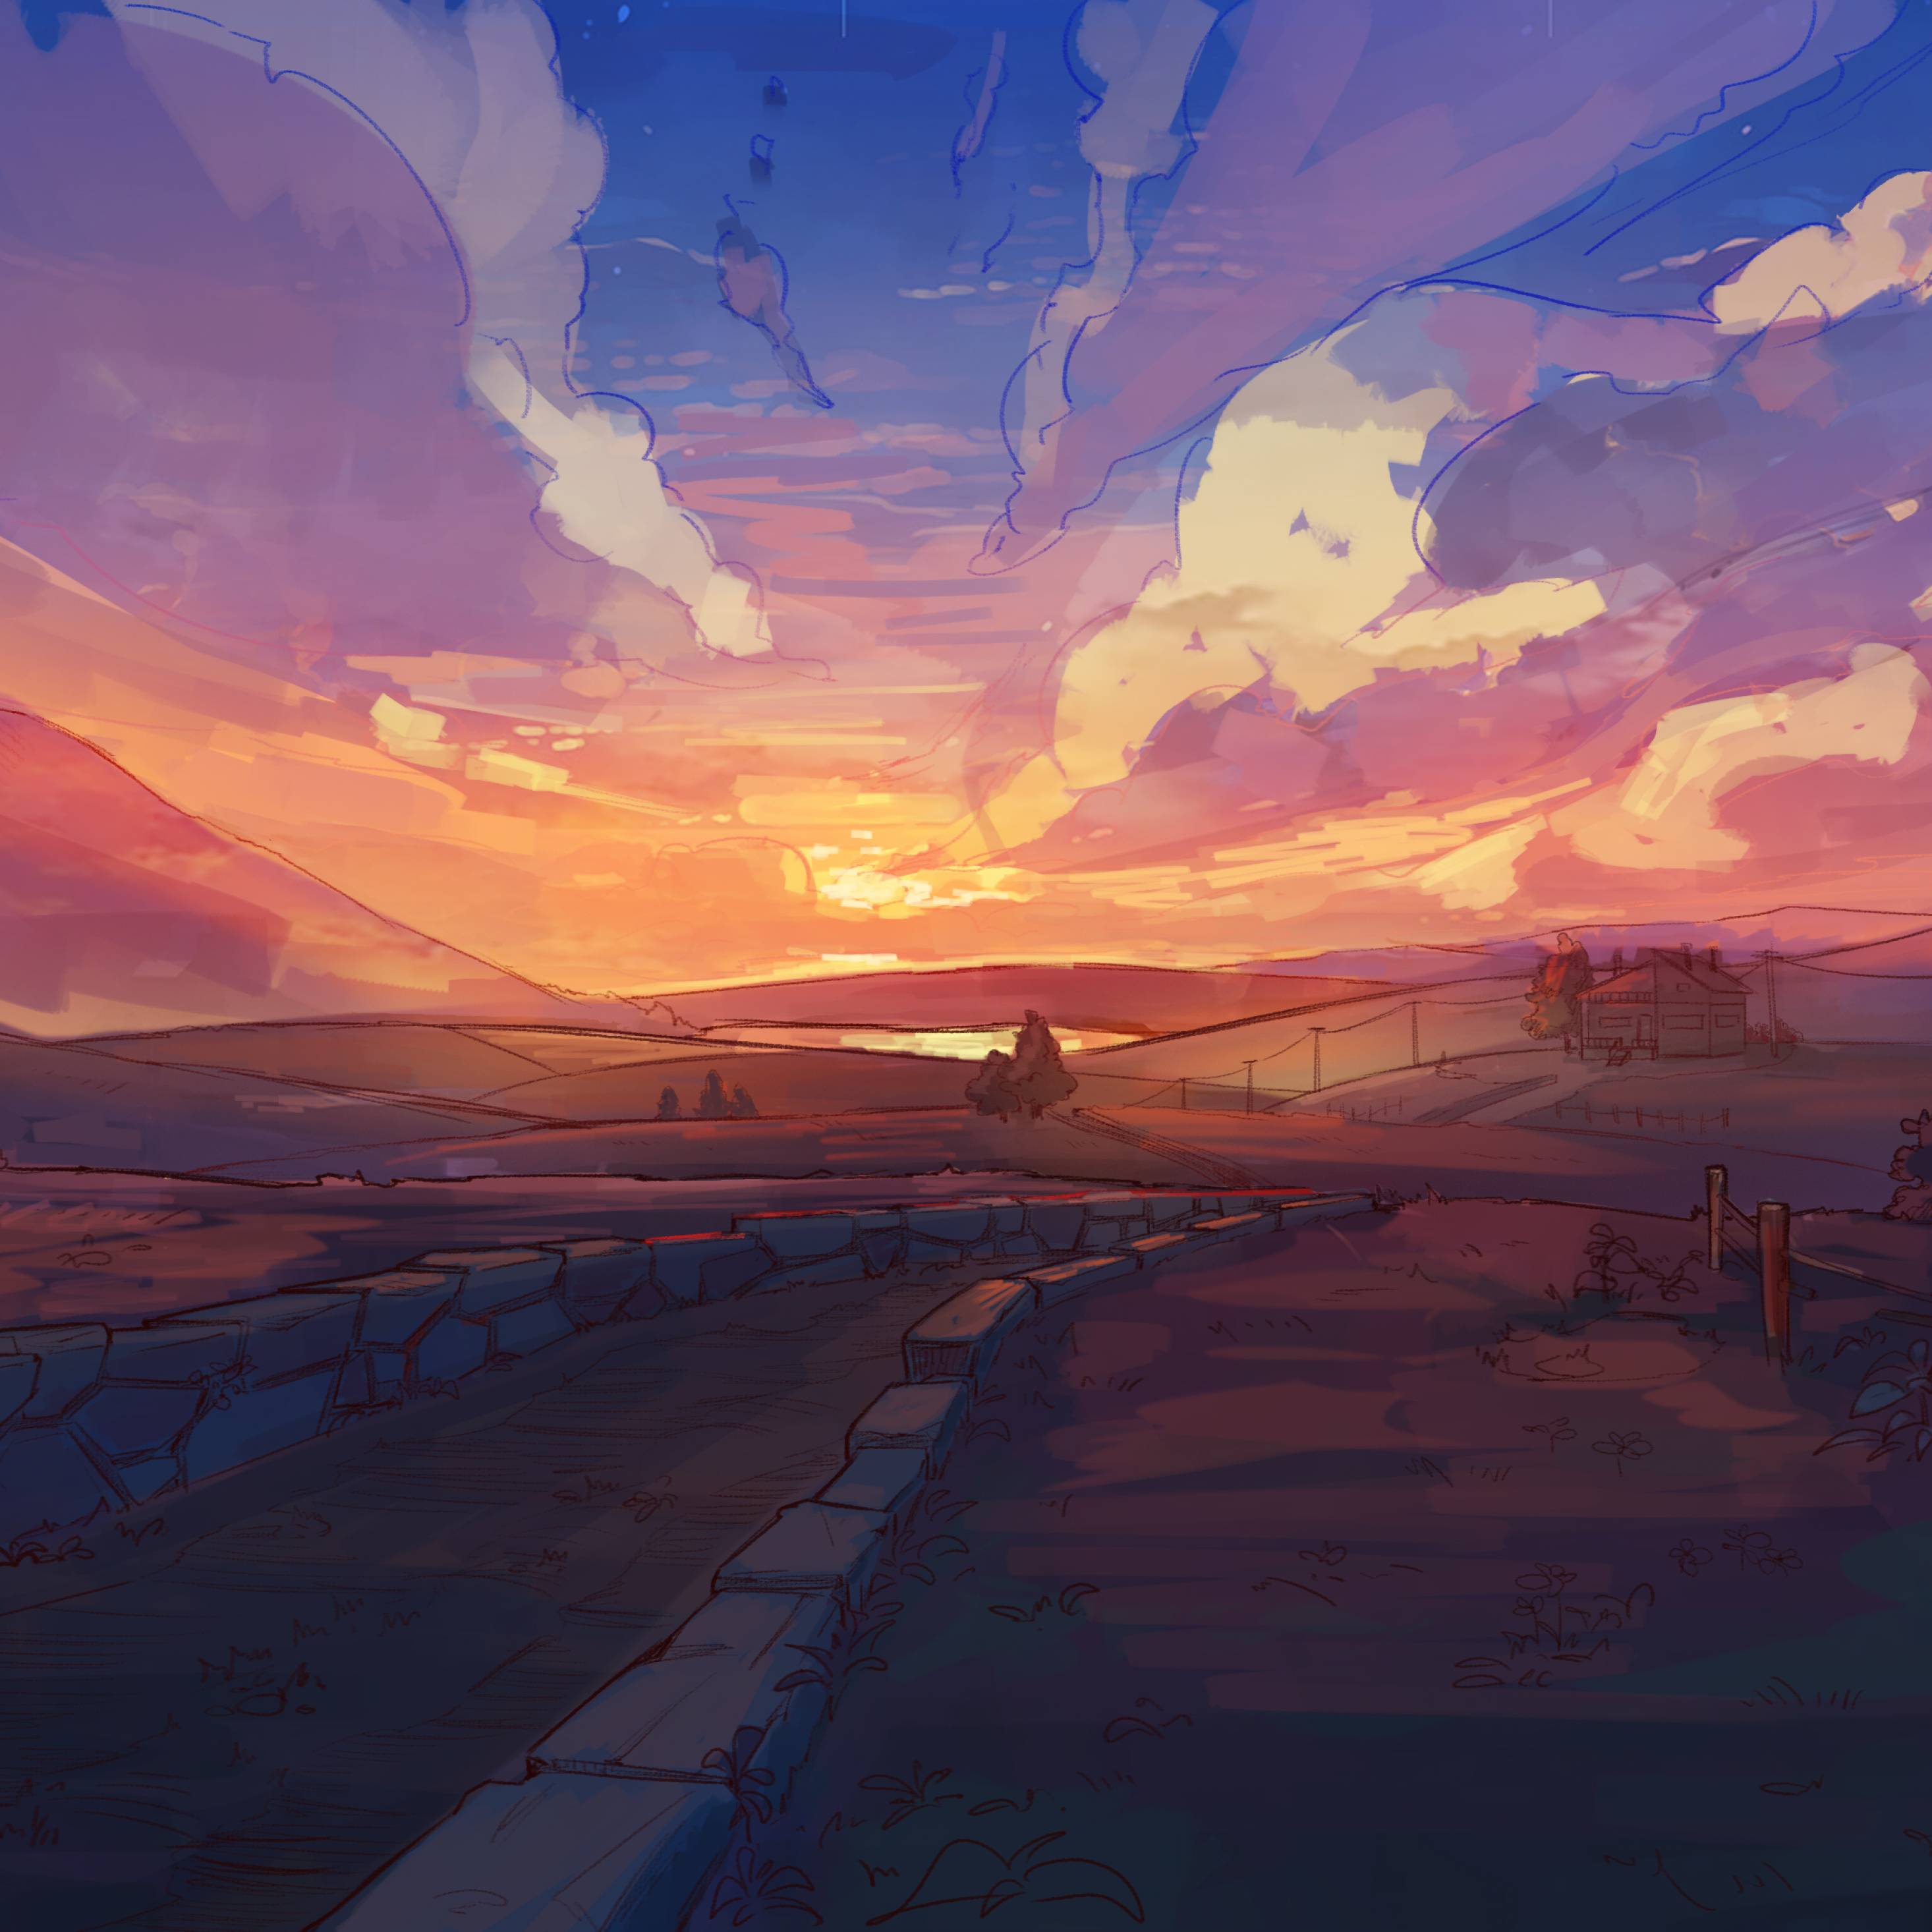 A digital painting of a beautiful sunset over a bridge - Anime sunset